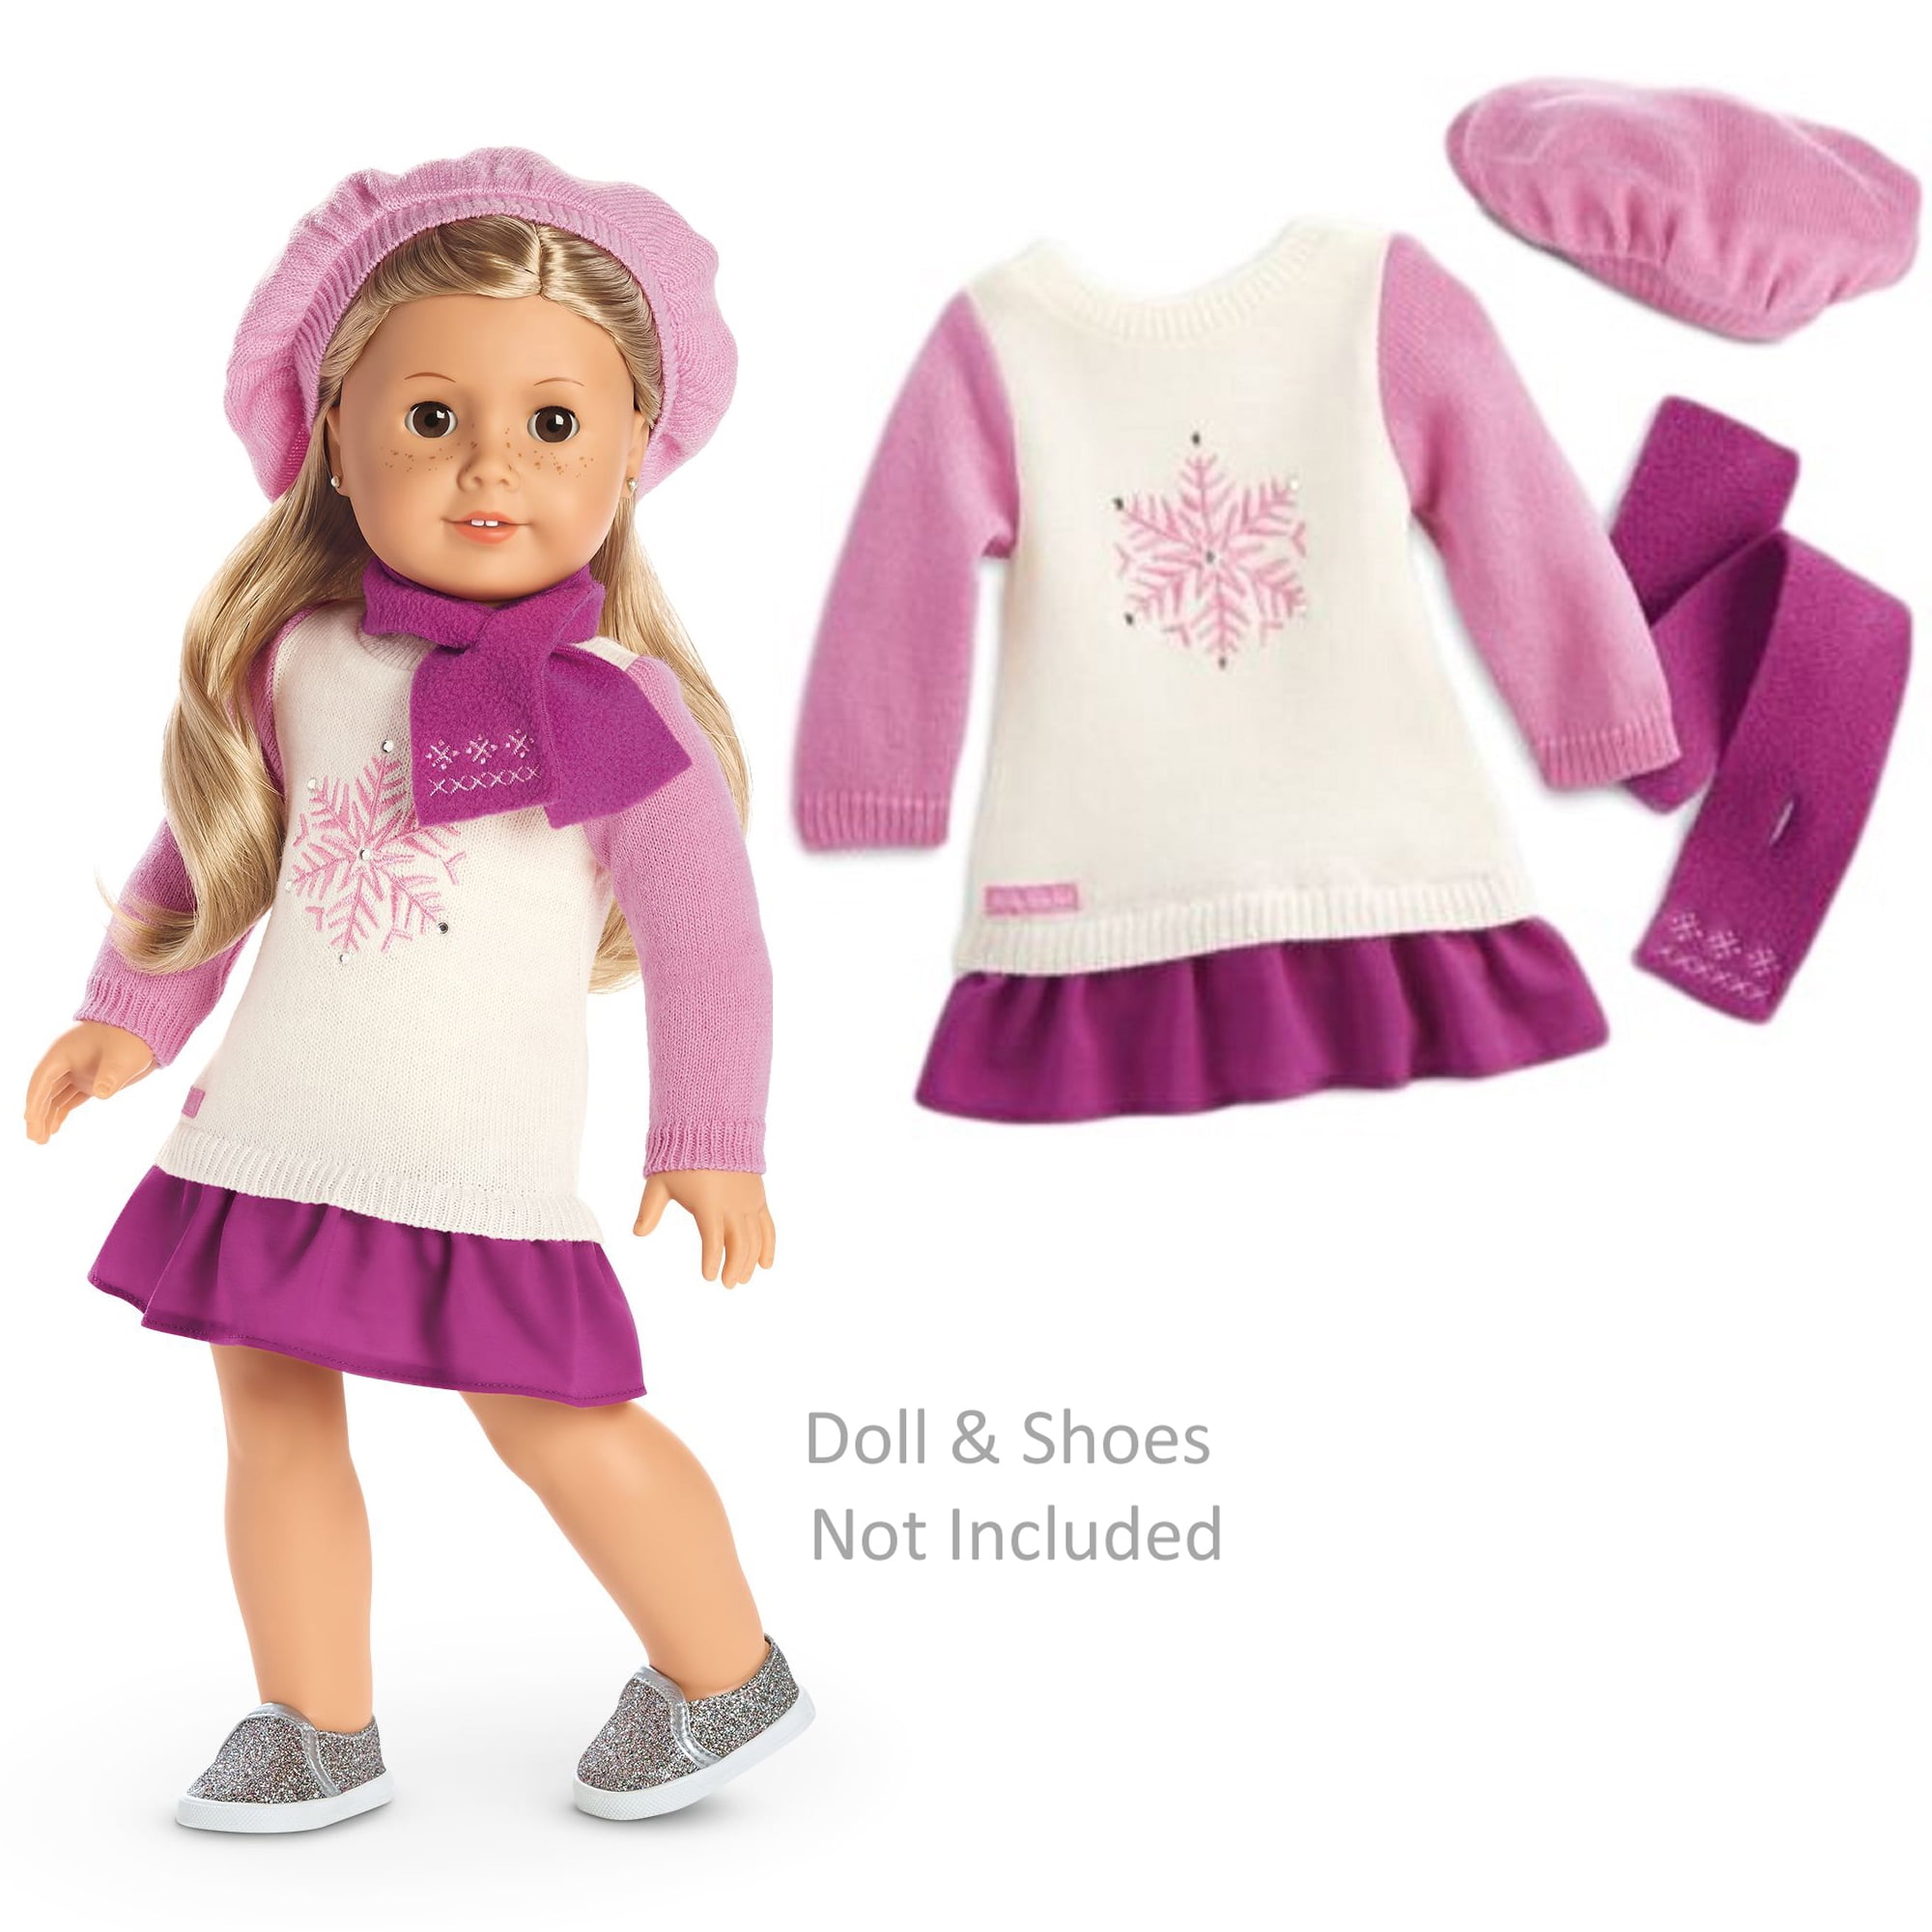 American Girl Truly Me Dot Dress Outfit in Bag for 18 Dolls Doll Not Included